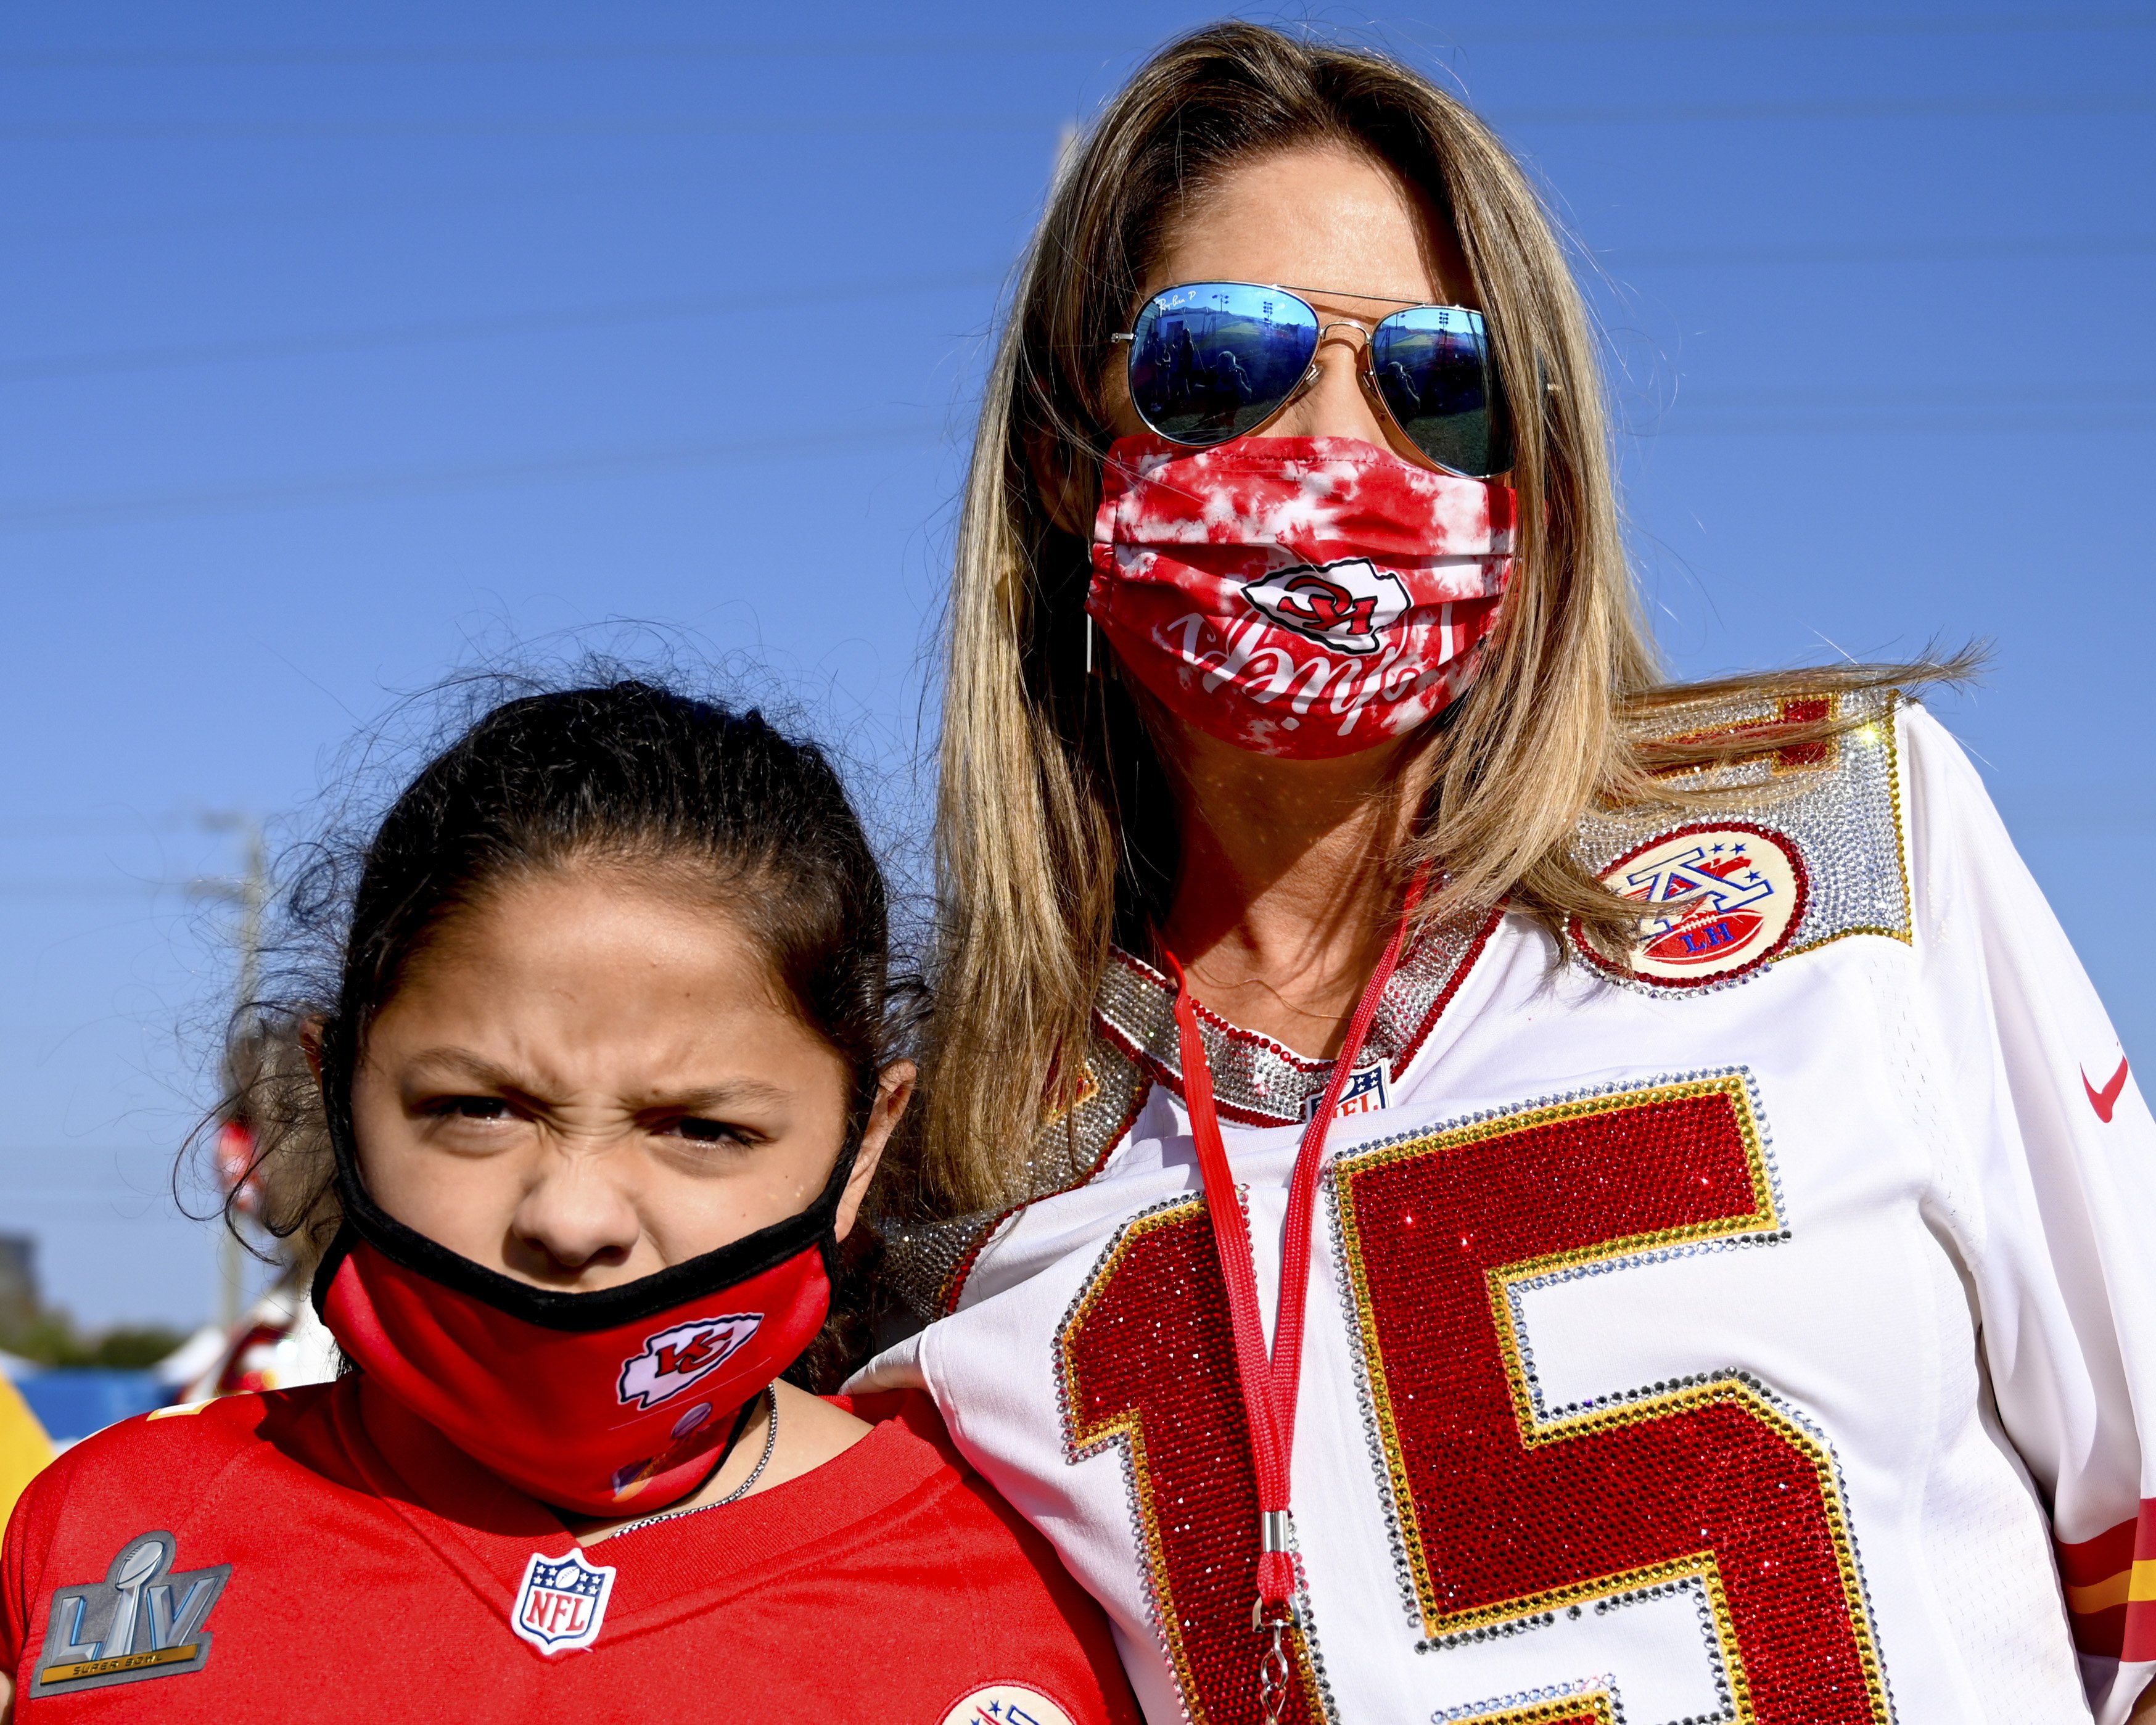 Randi Martin (R), the mother of Patrick Mahomes of the Kansas City Chiefs, poses for a photo as she arrives at the stadium prior to Super Bowl LV at Raymond James Stadium on February 7, 2021, in Tampa, Florida. | Source: Getty Images